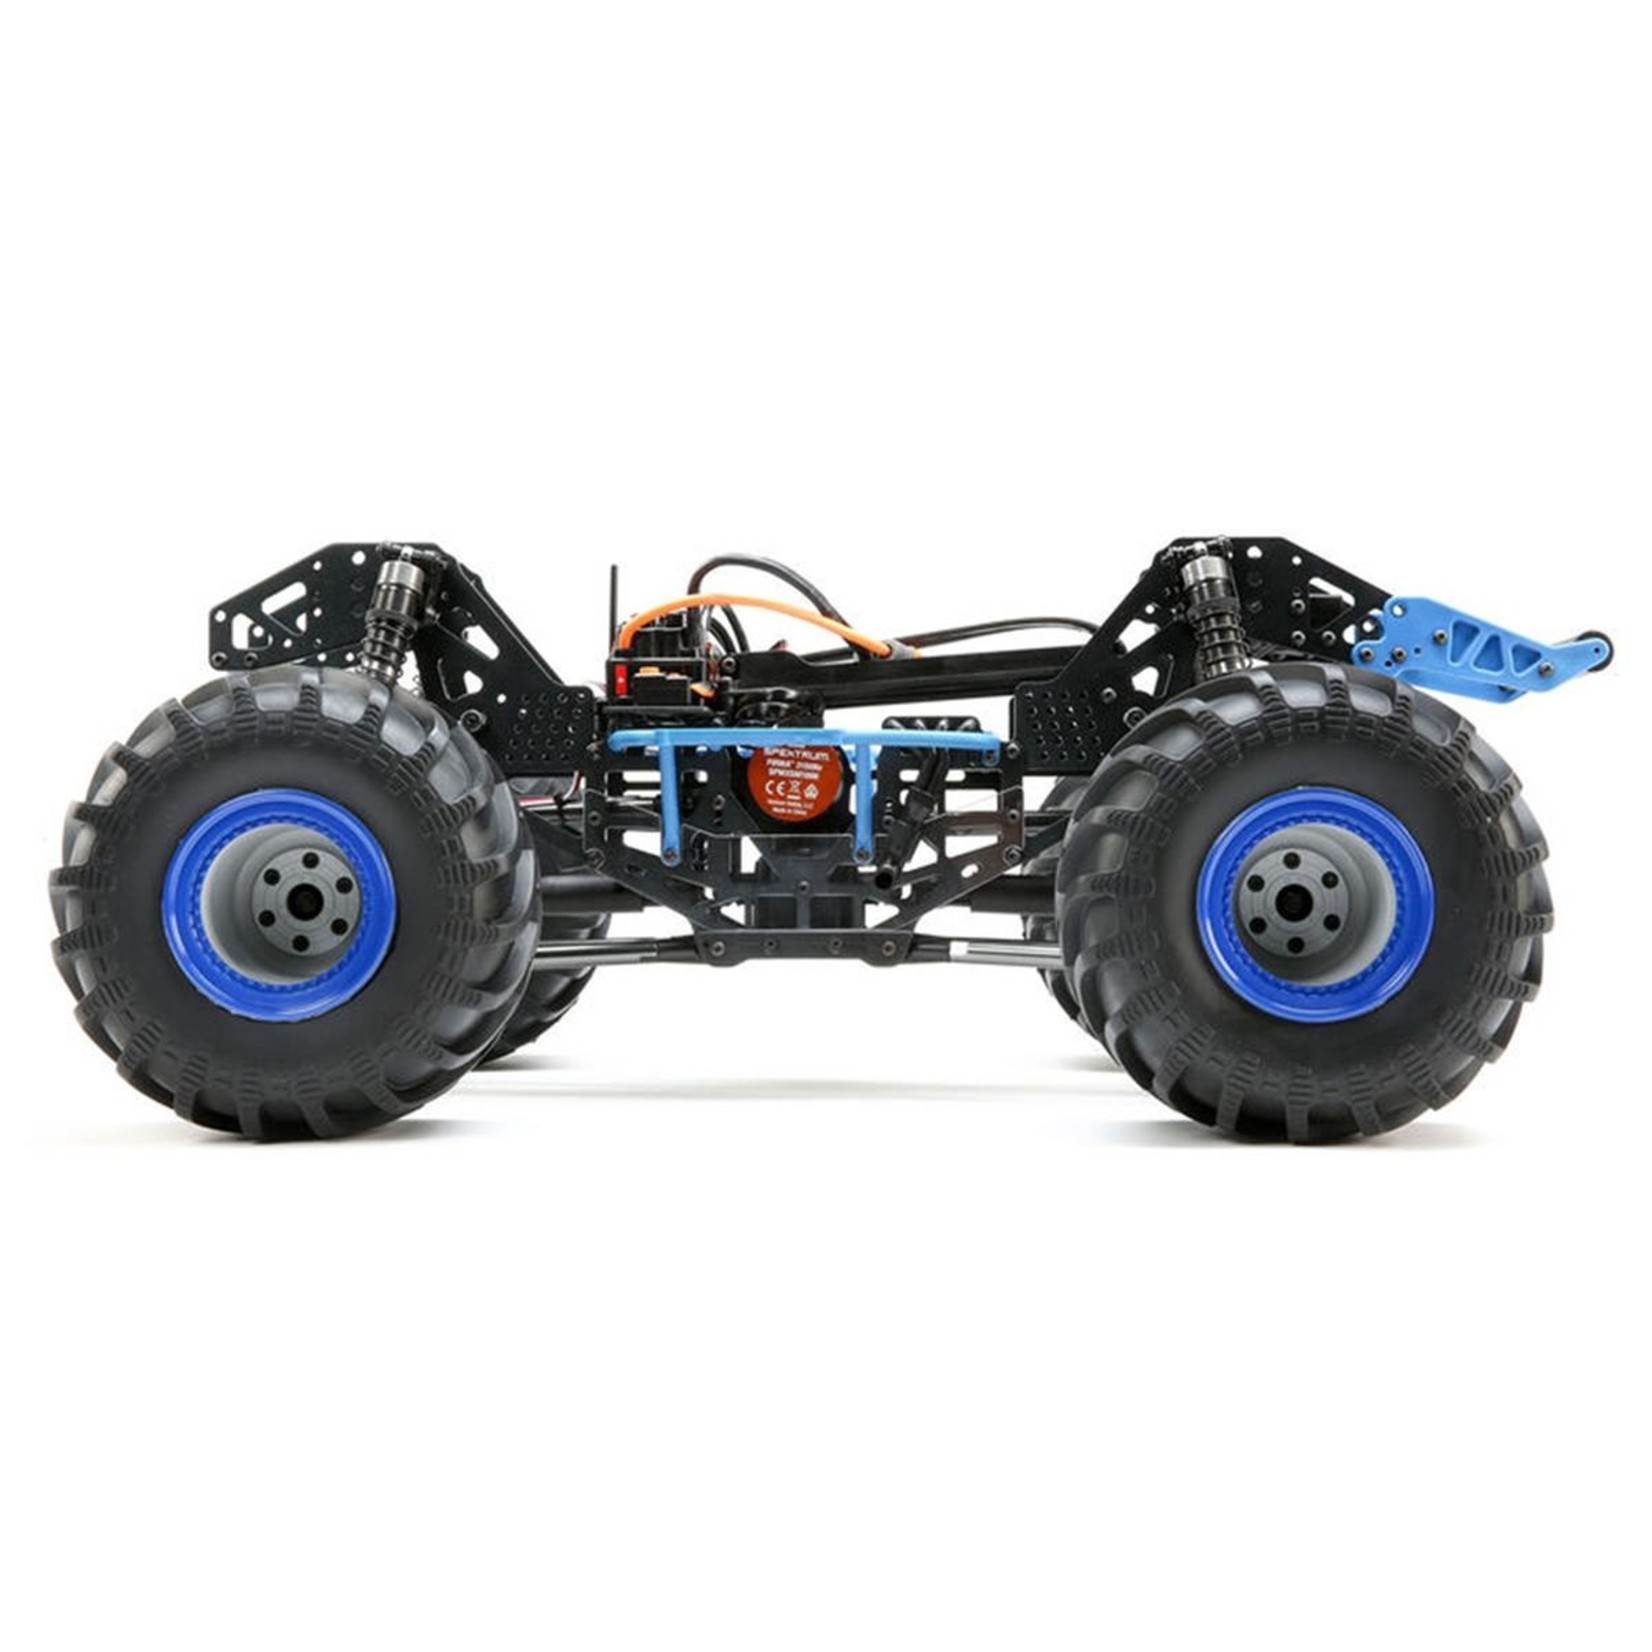 Losi Losi LMT Son Uva Digger RTR 1/10 4WD Solid Axle Monster Truck w/DX3 2.4GHz Radio #LOS04021T2